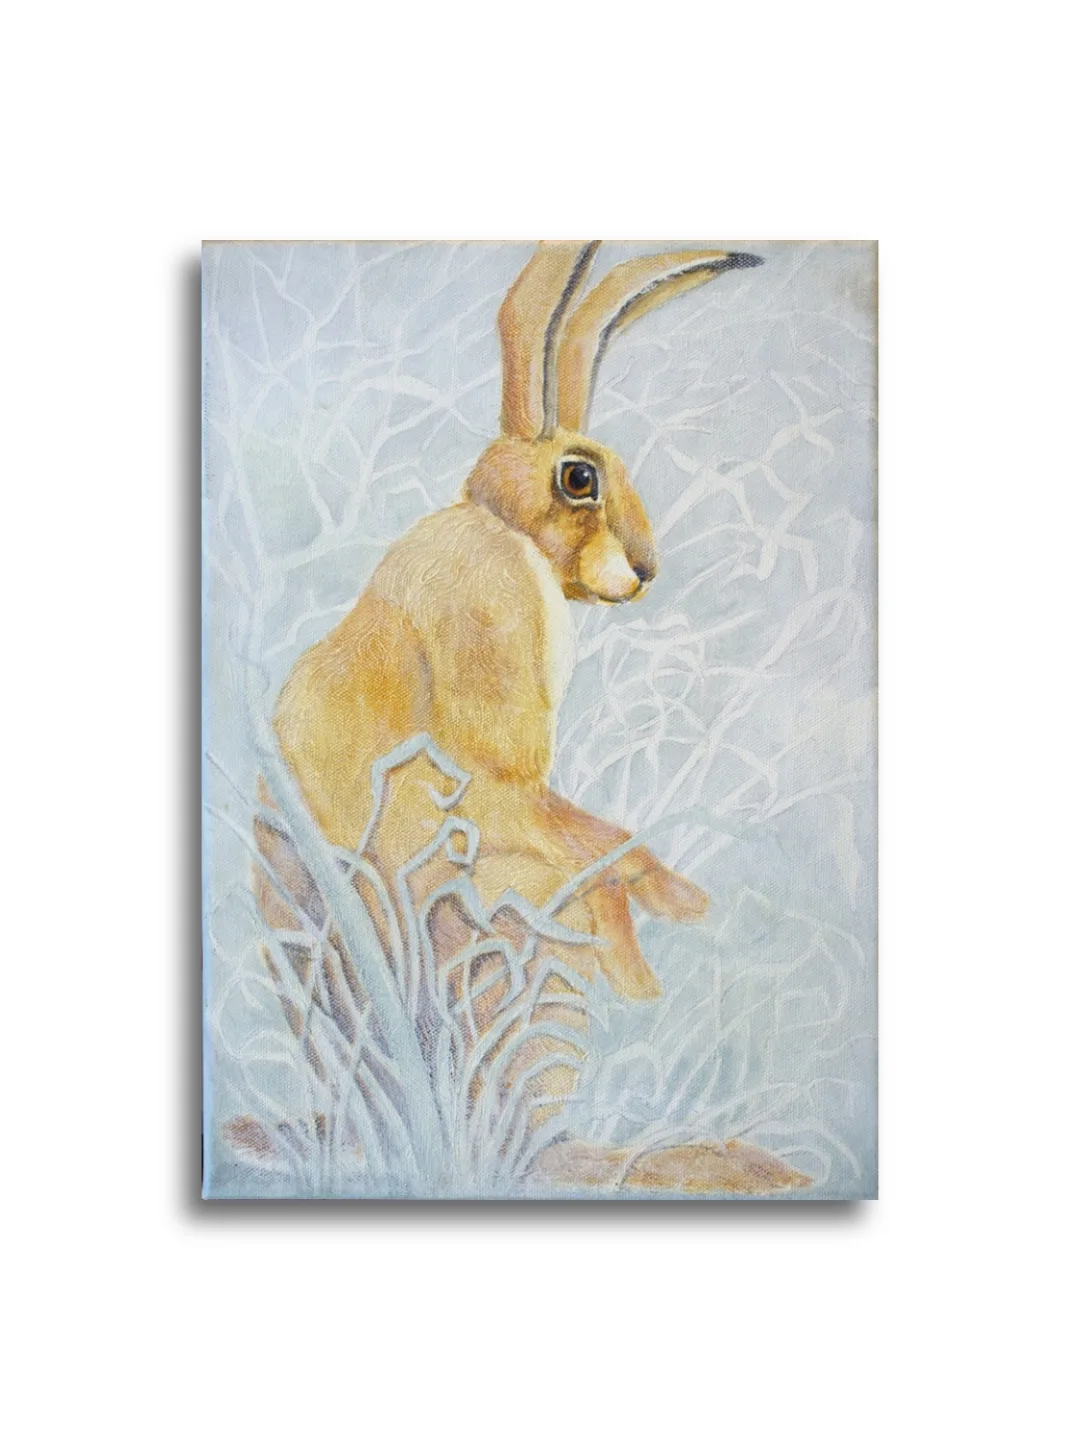 Grassy Hare by Ann Richmond - A stunning, Original artwork featuring a Hare amidst pale grasses. Painted in the artist's unique style... Framing available.